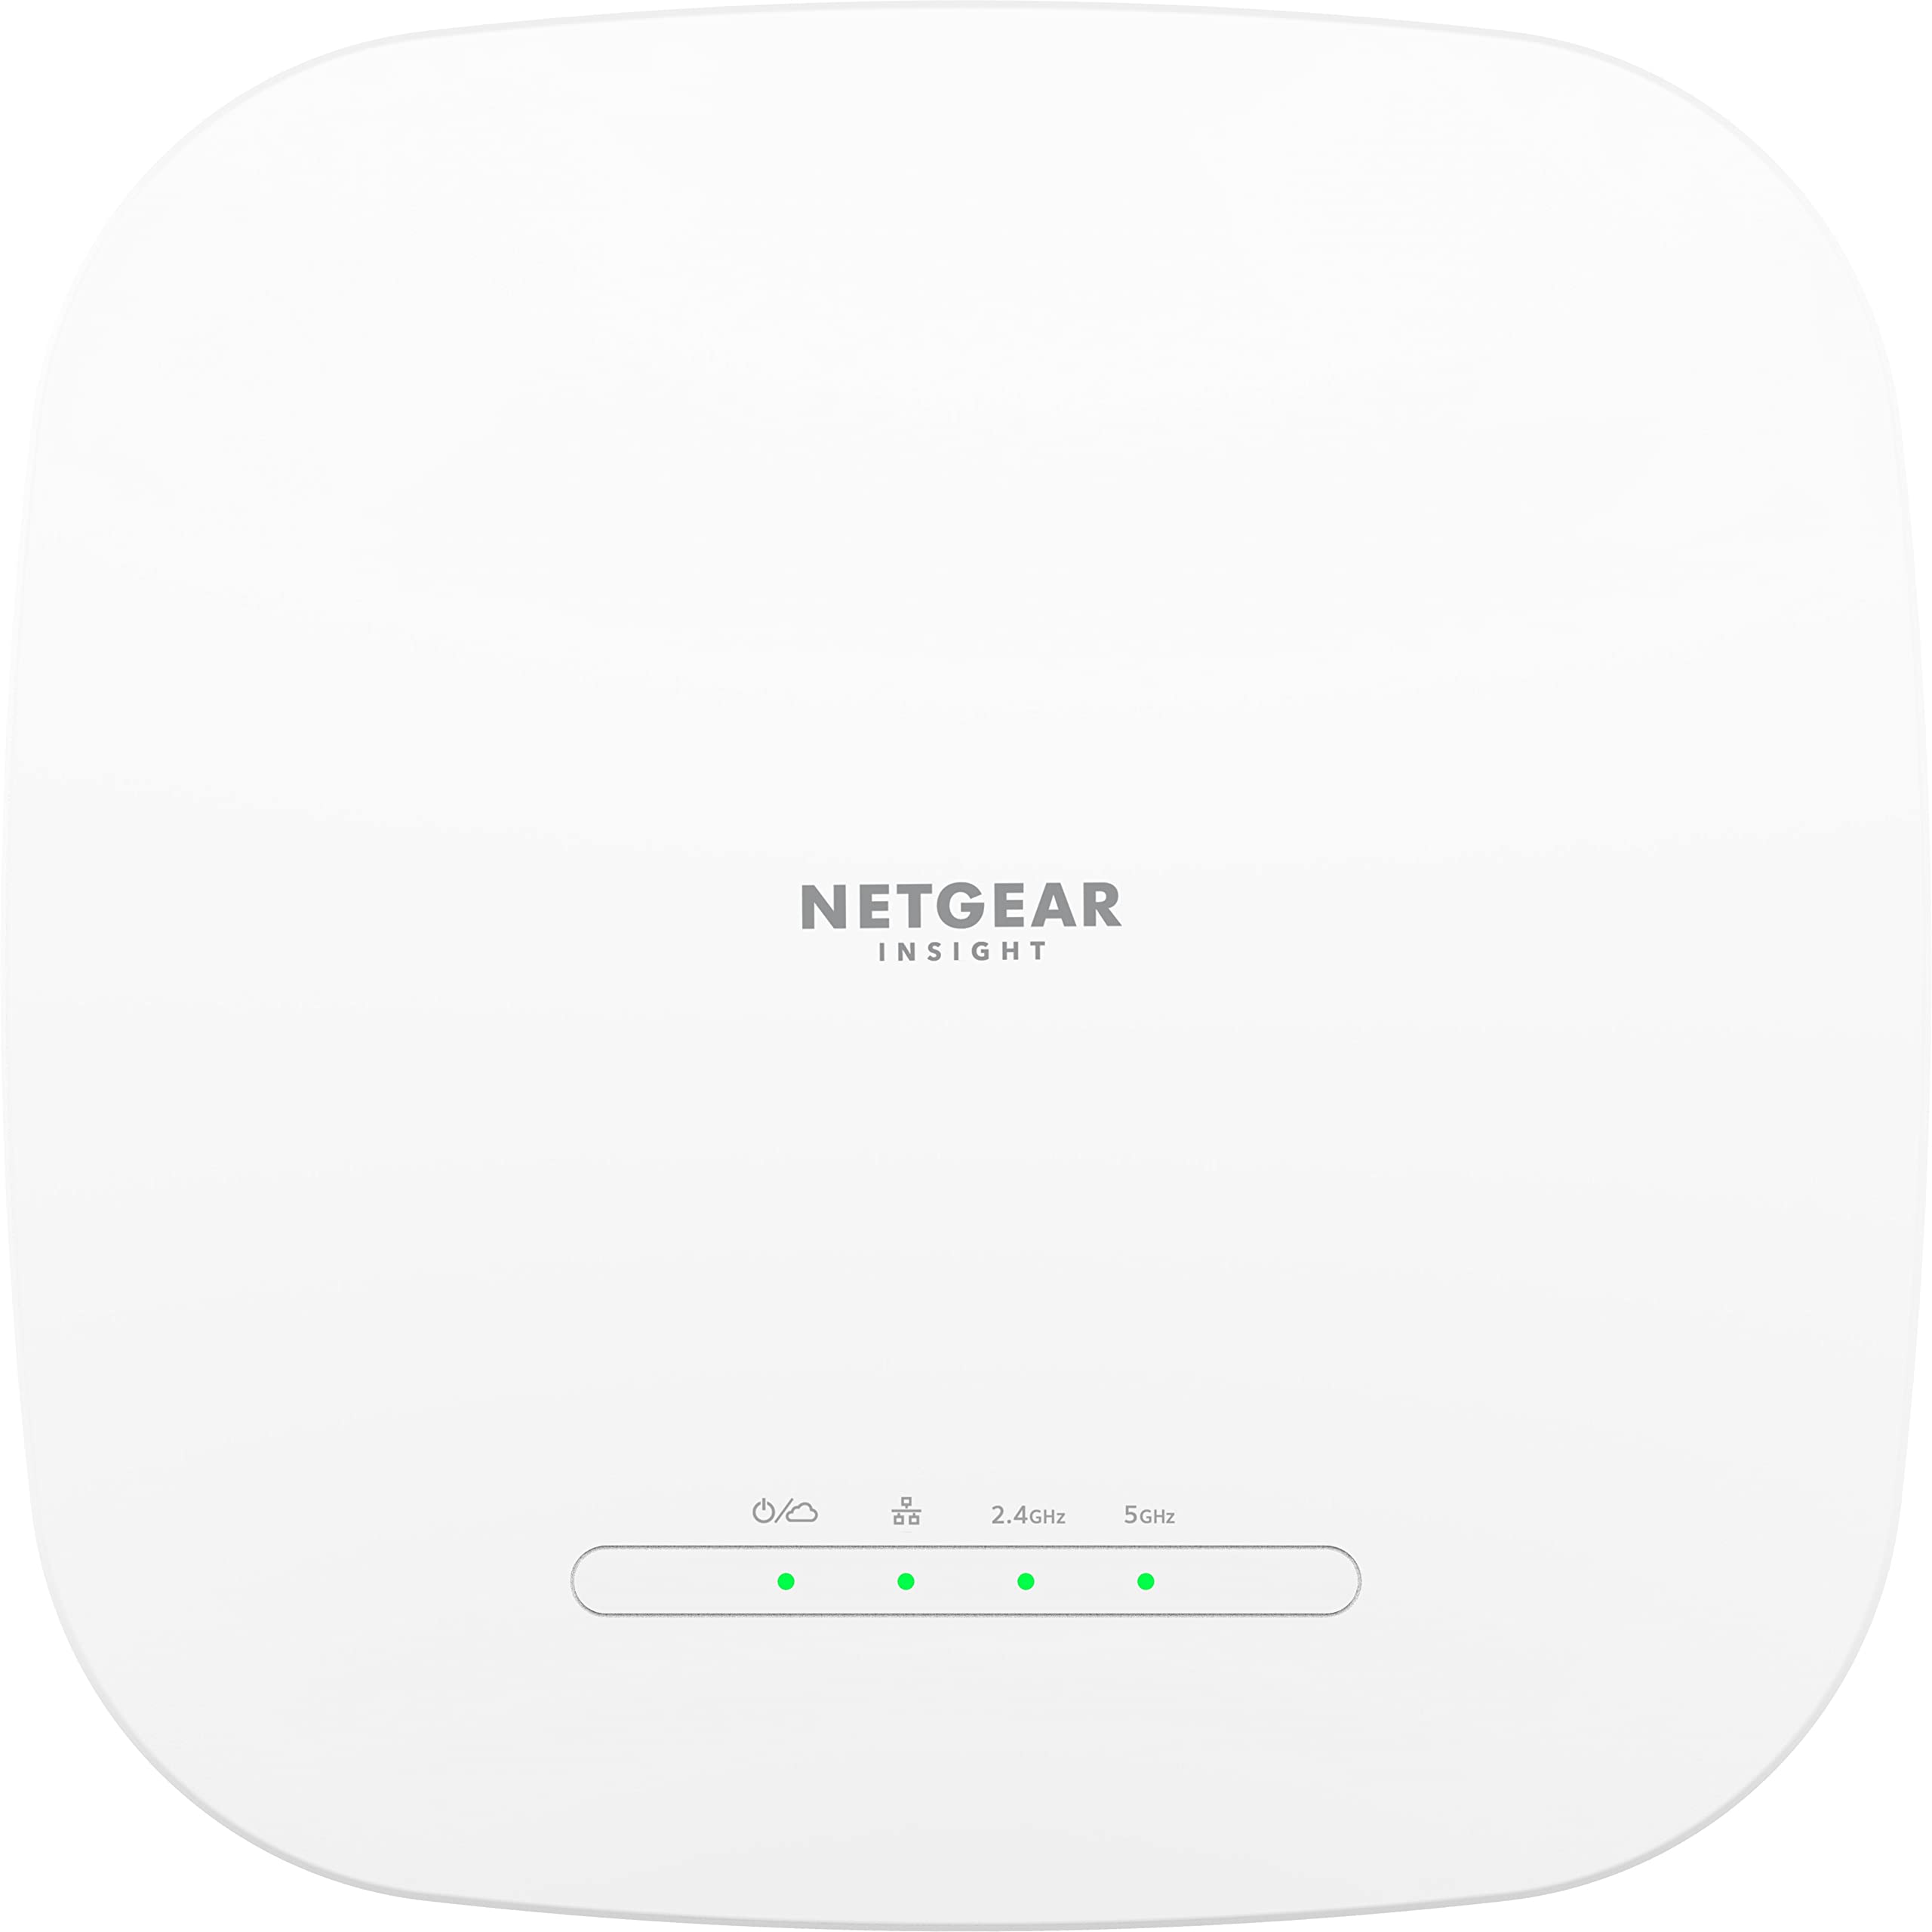 NETGEAR Cloud Managed Wireless Access Point (WAX615) - WiFi 6 Dual-Band AX3000 Speed | Up to 256 Client Devices | 802.11ax | Insight Remote Management | PoE+ Powered or AC Adapter (not Included) ‎WAX615-100NAS UPC  - #WAX615-100NAS